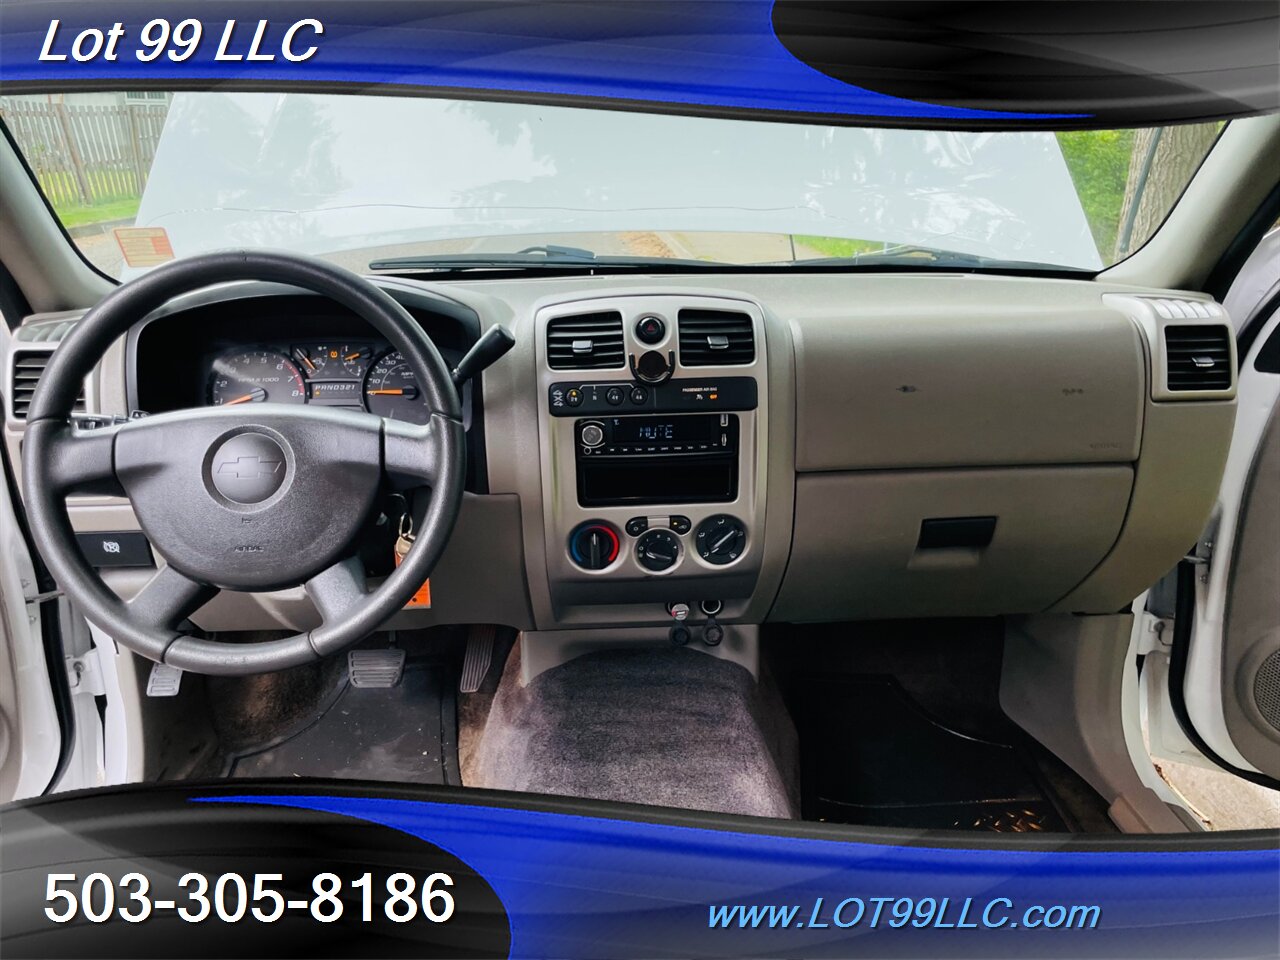 2007 Chevrolet Colorado Extended Cab LT 4x4 6' Bed Vortec 3.7L I5 242hp   - Photo 10 - Milwaukie, OR 97267